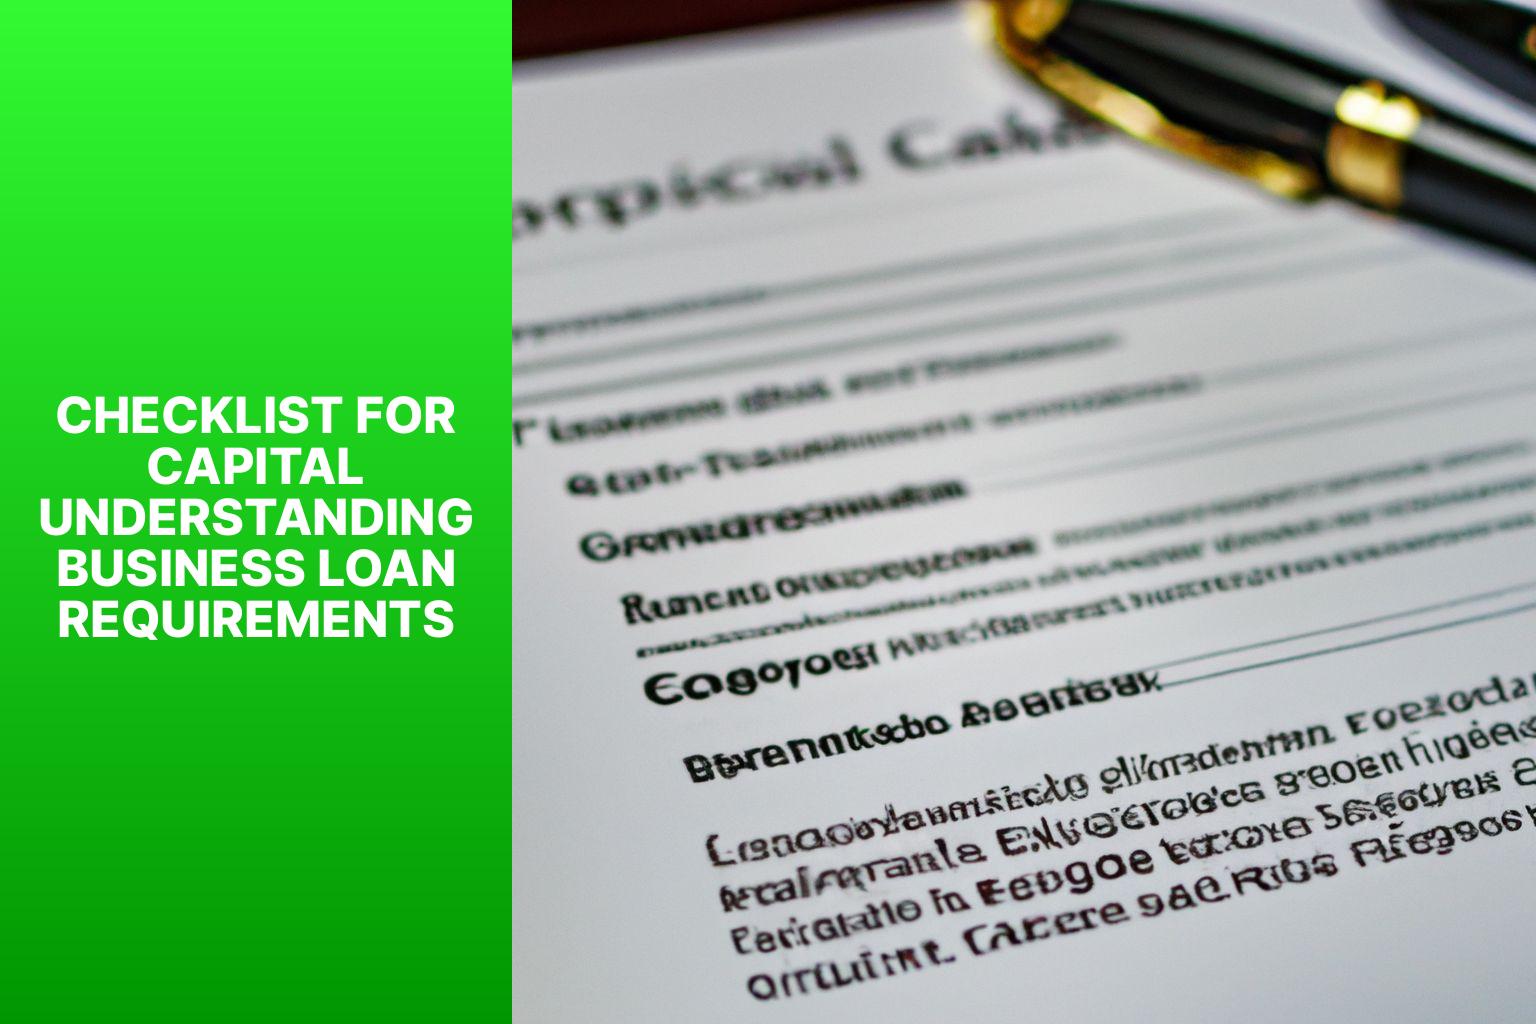 Checklist for Capital Understanding Business Loan Requirements